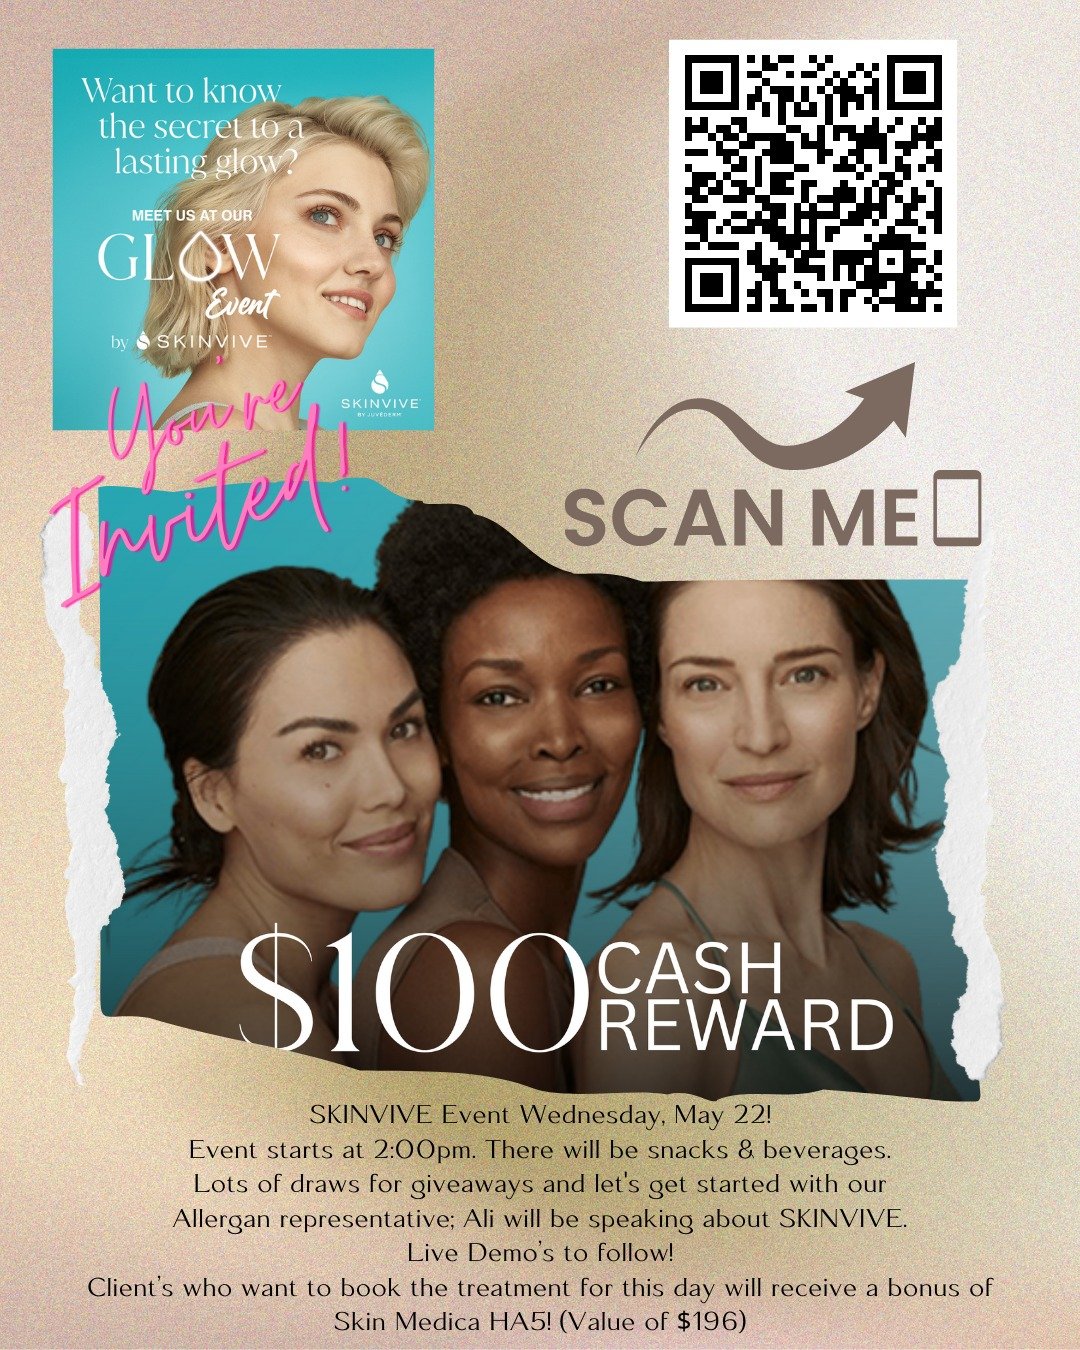 Scan the QR code and join us for this exclusive event! 
Wednesday, May 22 @2:00 - 4:30 pm